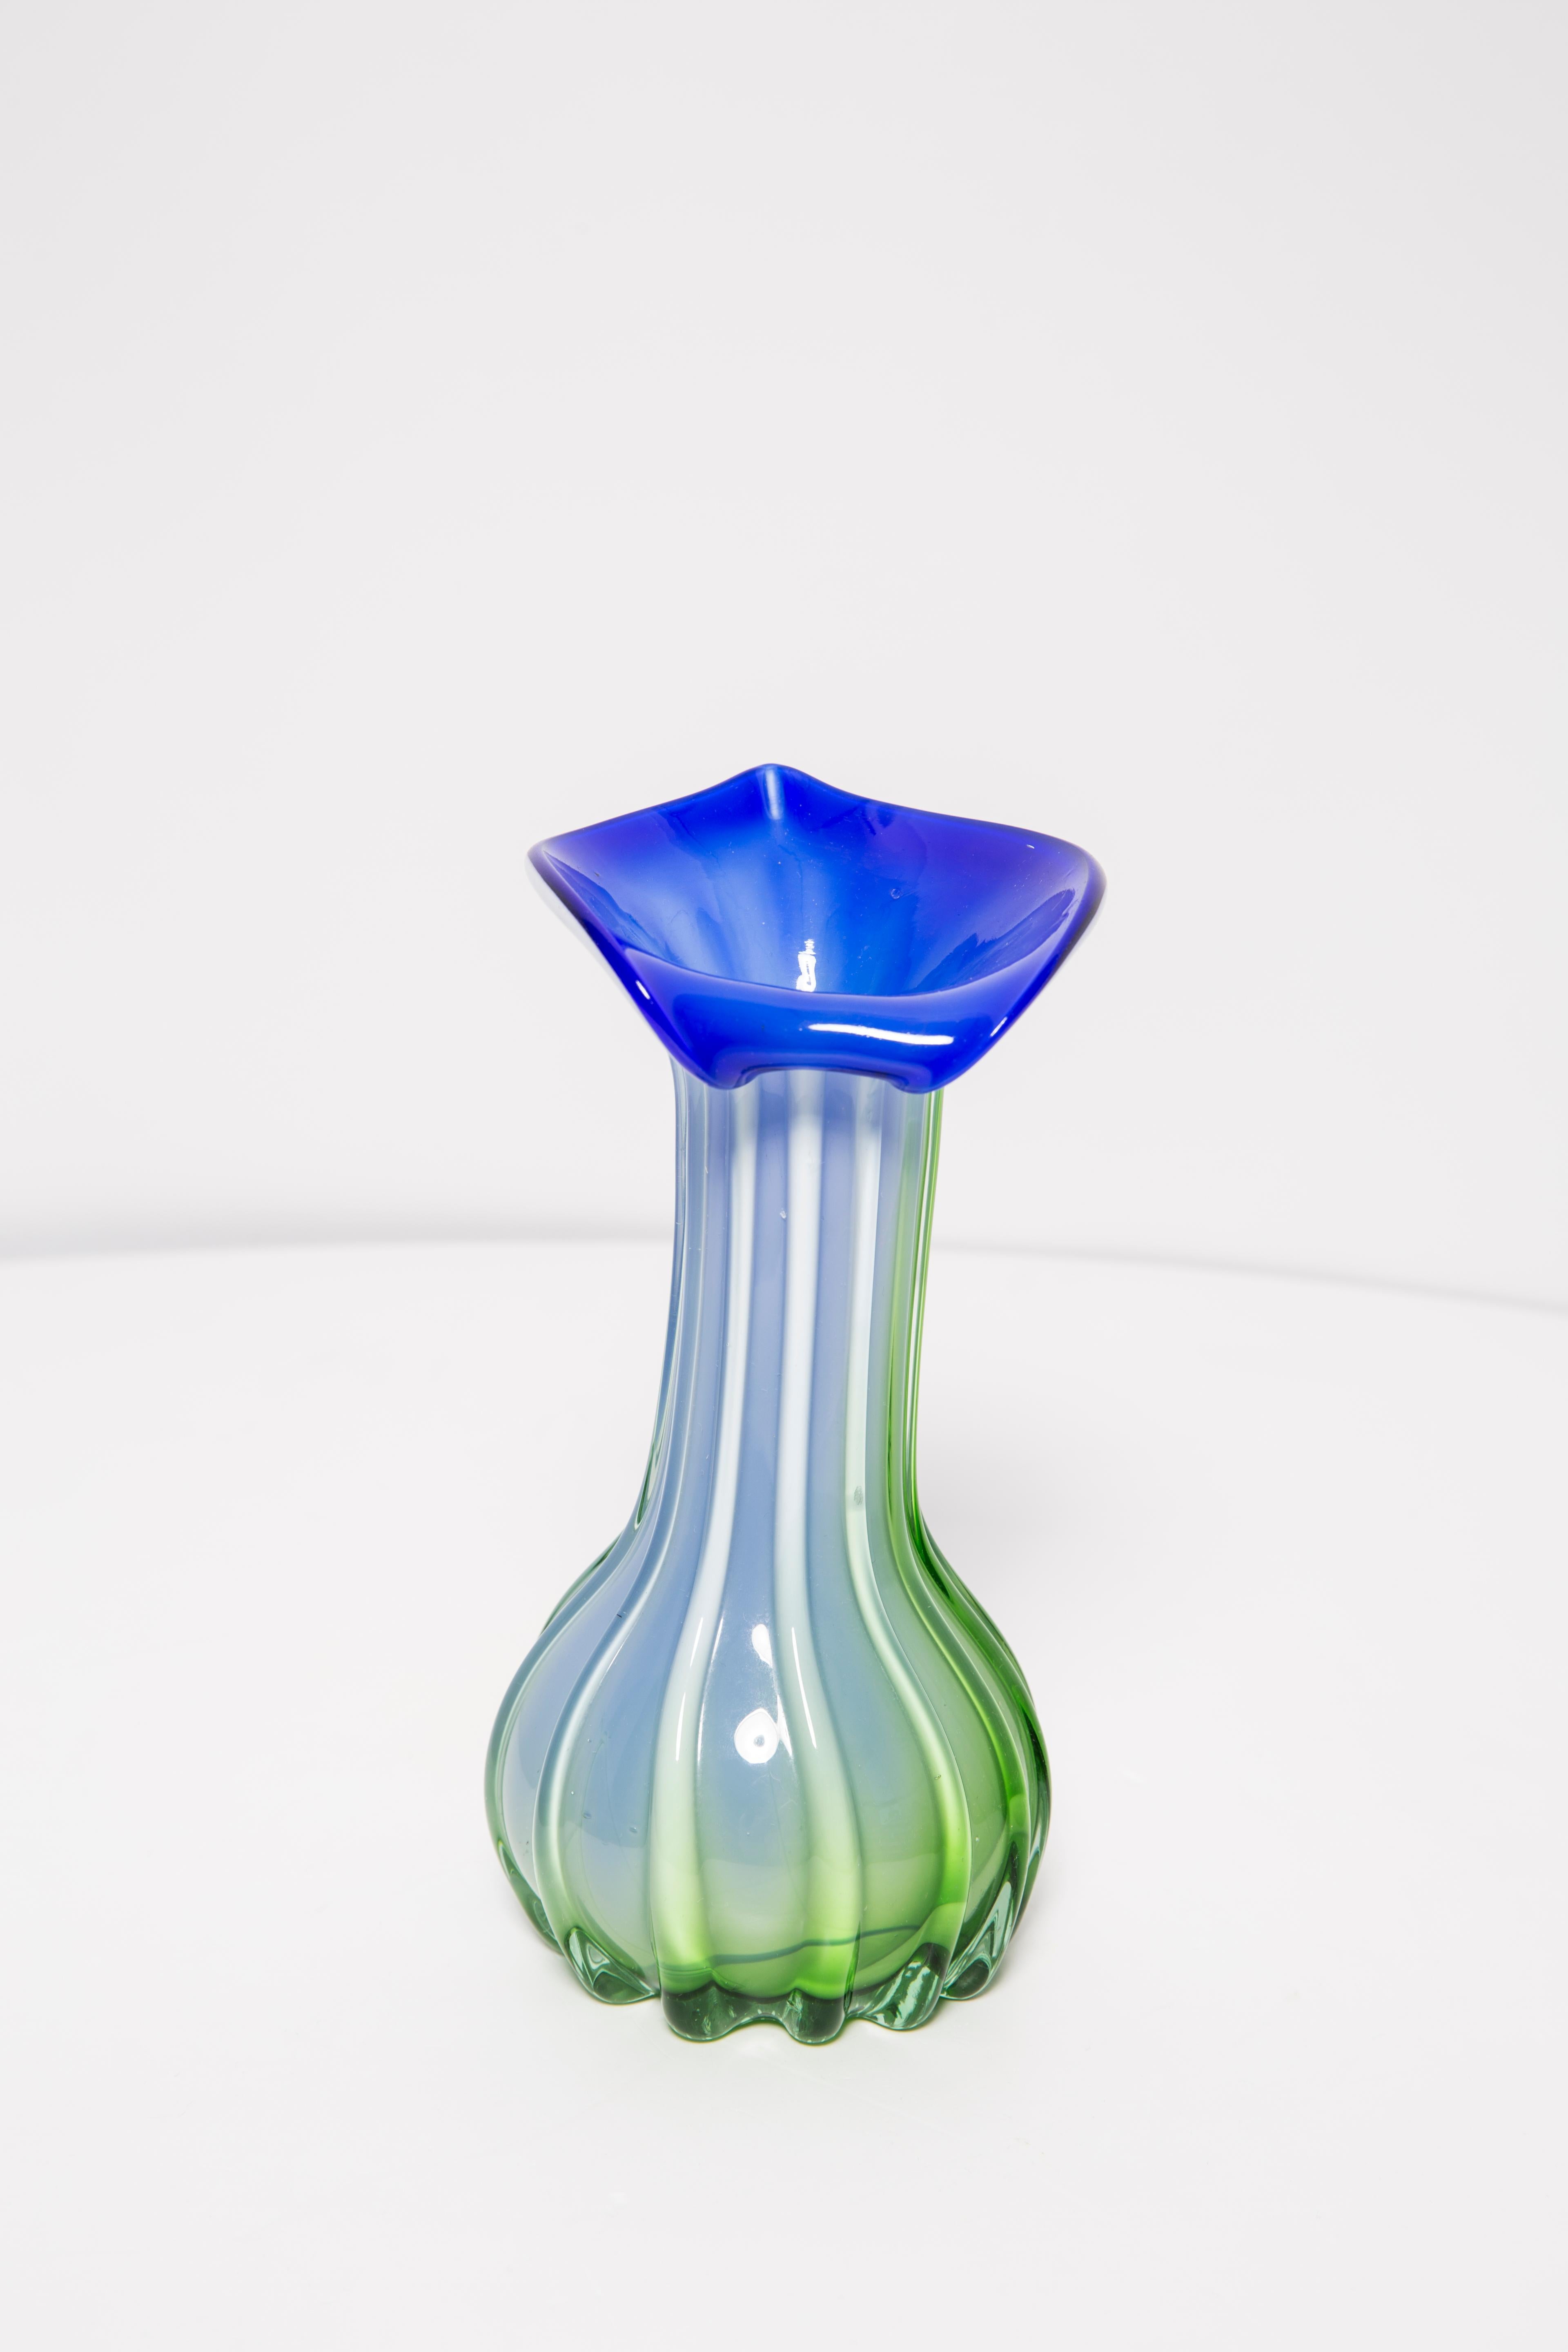 Midcentury Vintage Green and Blue Murano Vase, Italy, 1960s For Sale 1